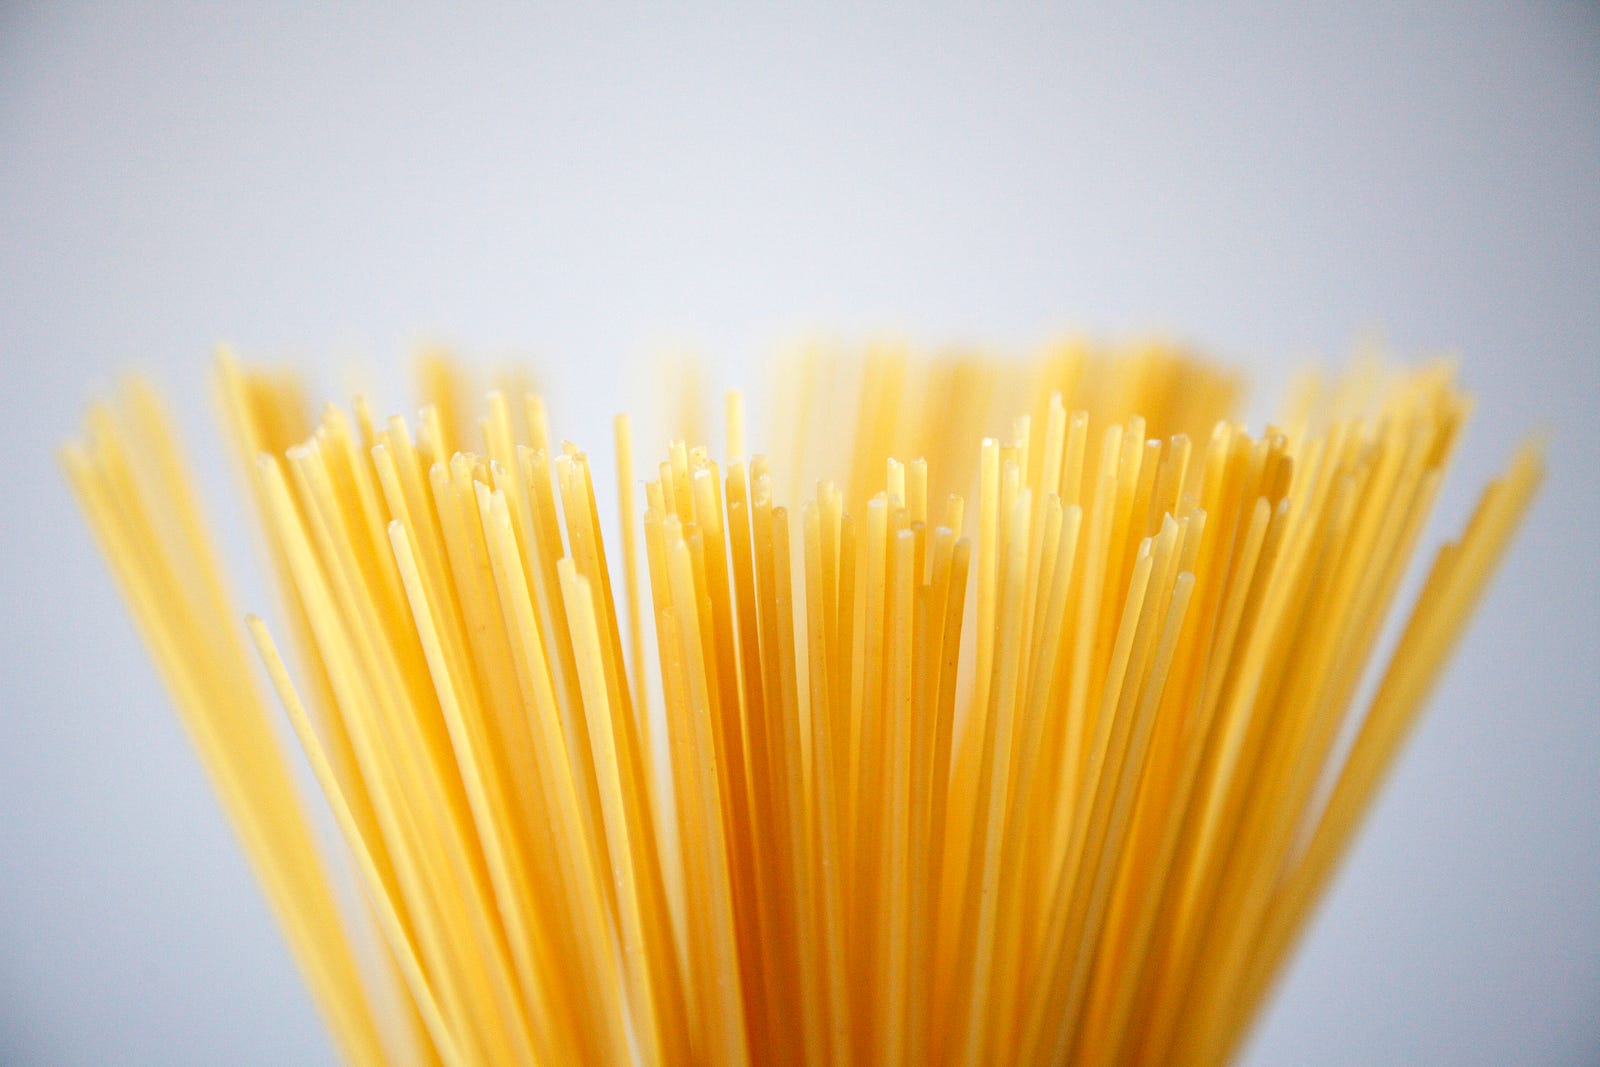 The ends of dry, uncooked spaghetti stick up into the image. Light gray background. Begin with one gram of carbs per pound of body weight to lose fat. Use two grams to gain.